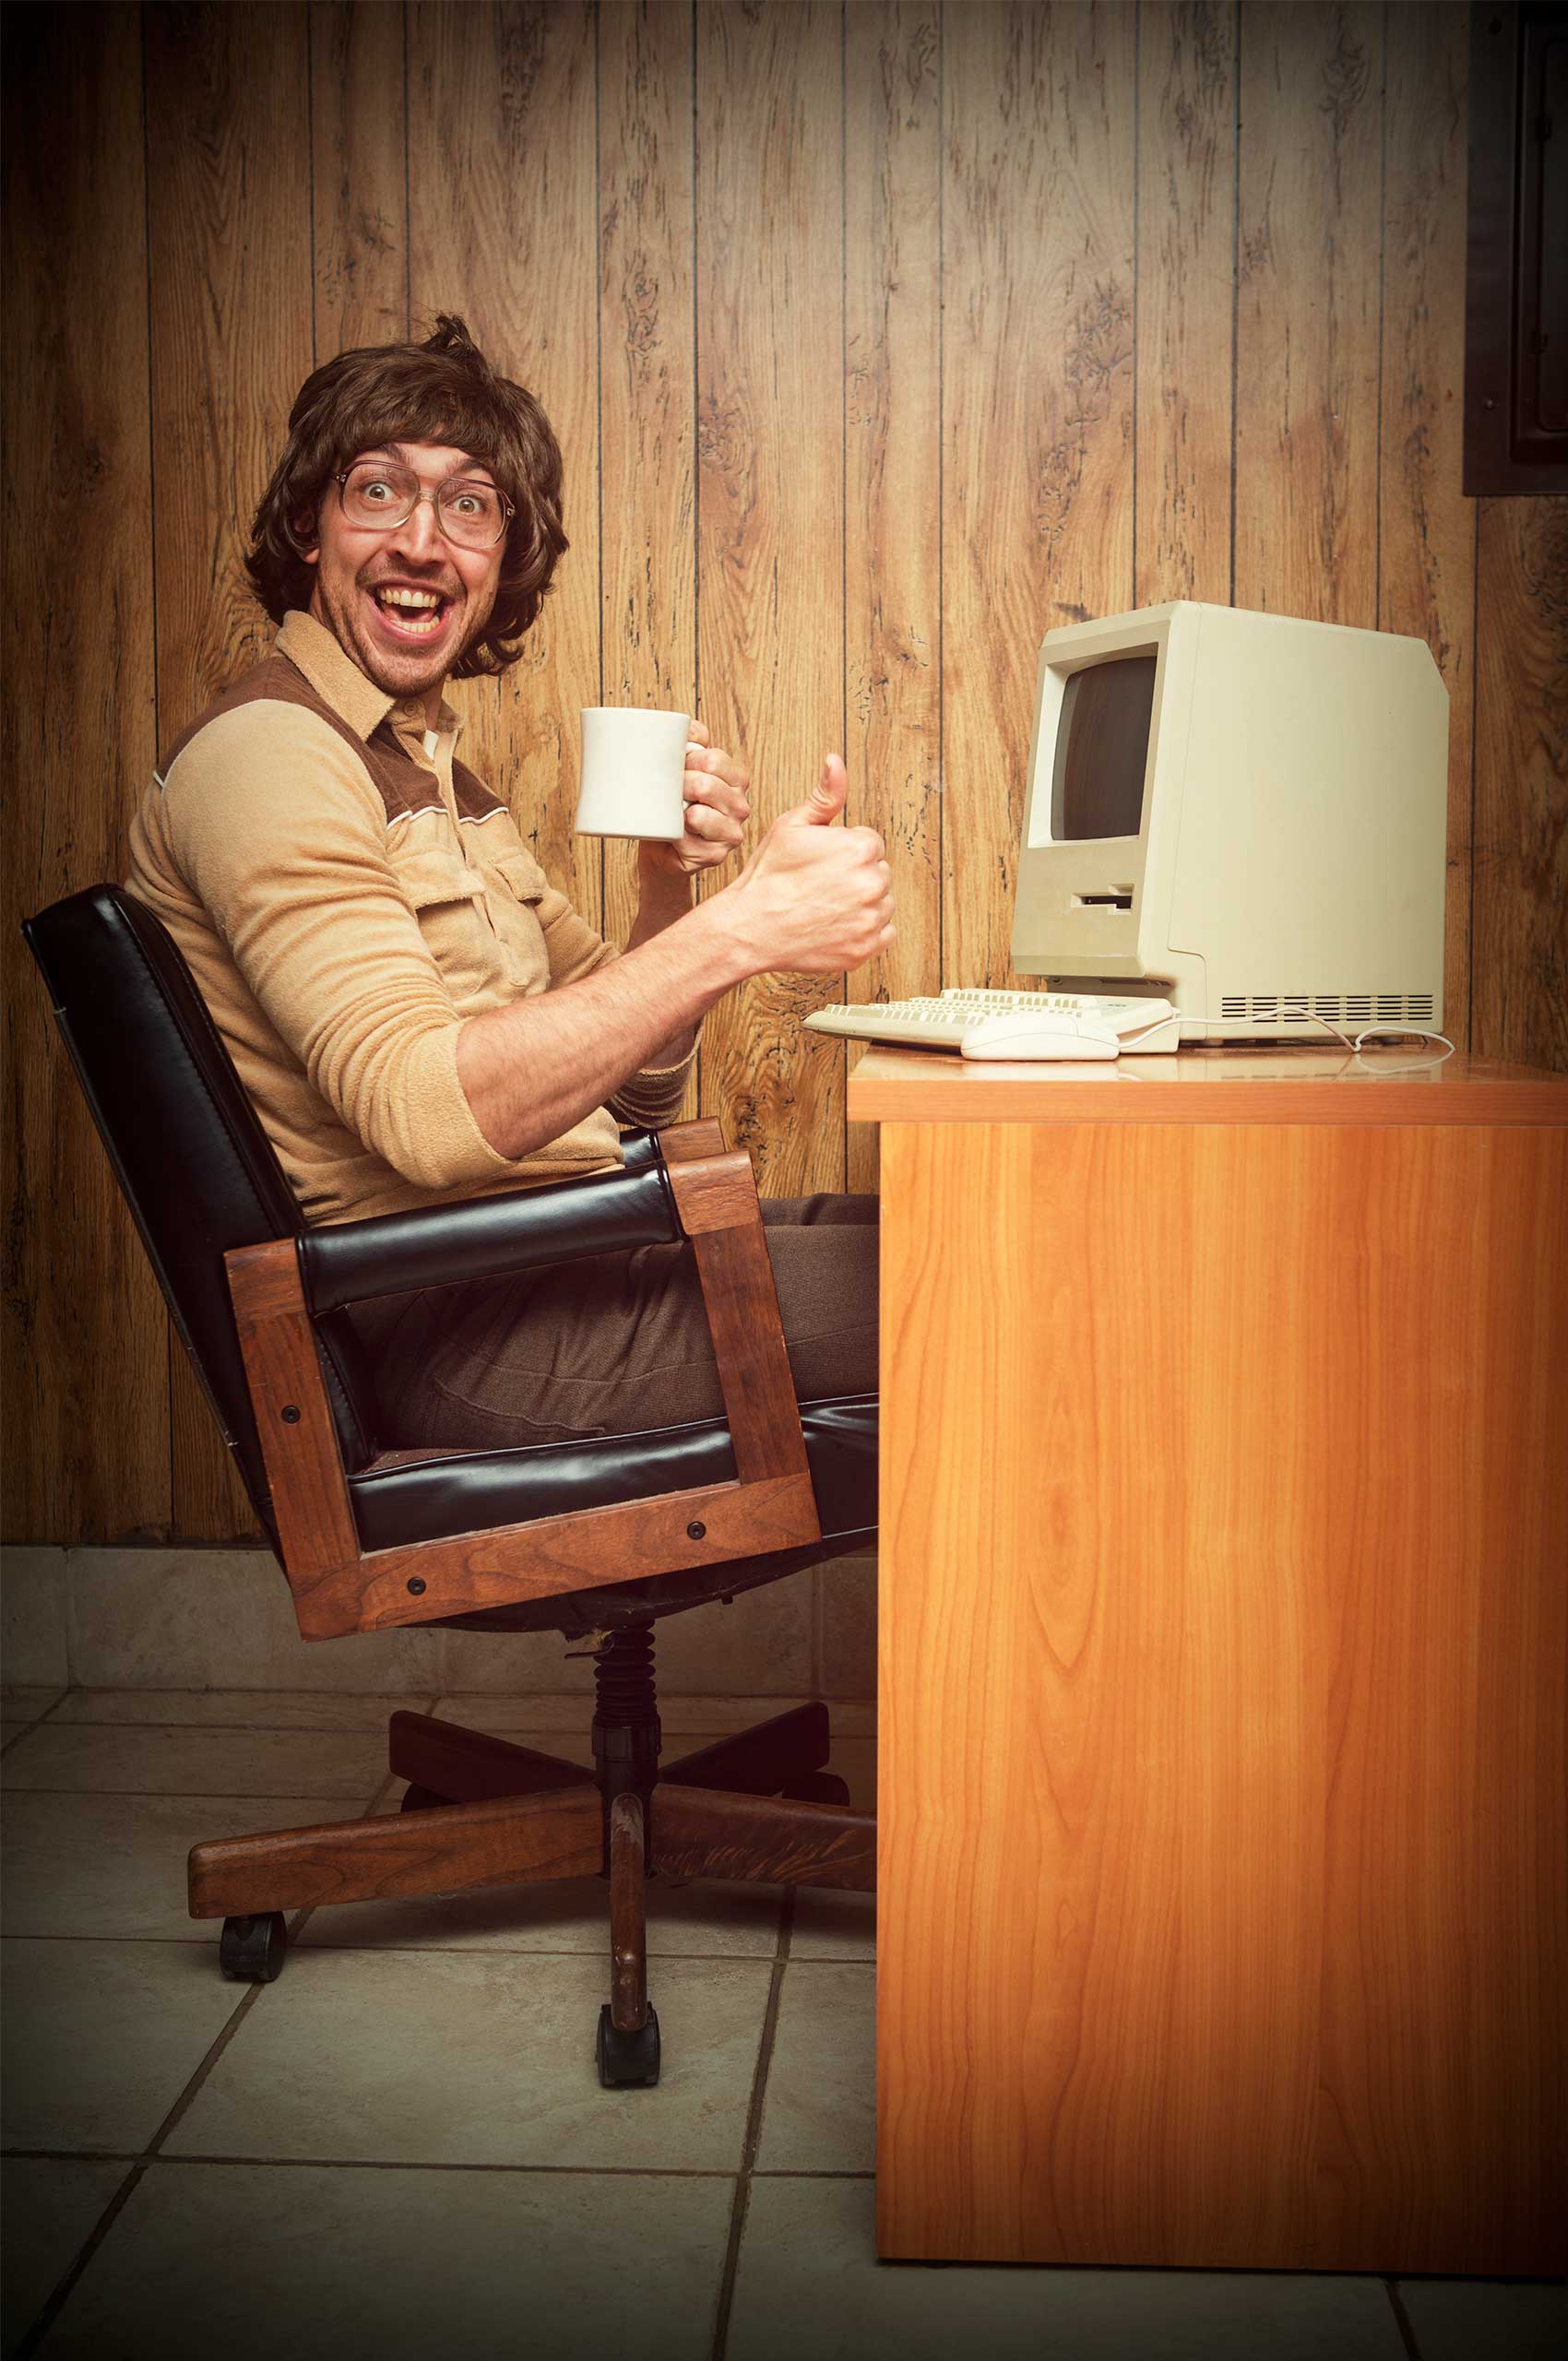 A vintage retro styled image with brown tones of a man in a wood paneled 1980s room sitting at his computer desk with a coffee cup in hand smiling. Bild: copy madiko / Foto: sjharmon